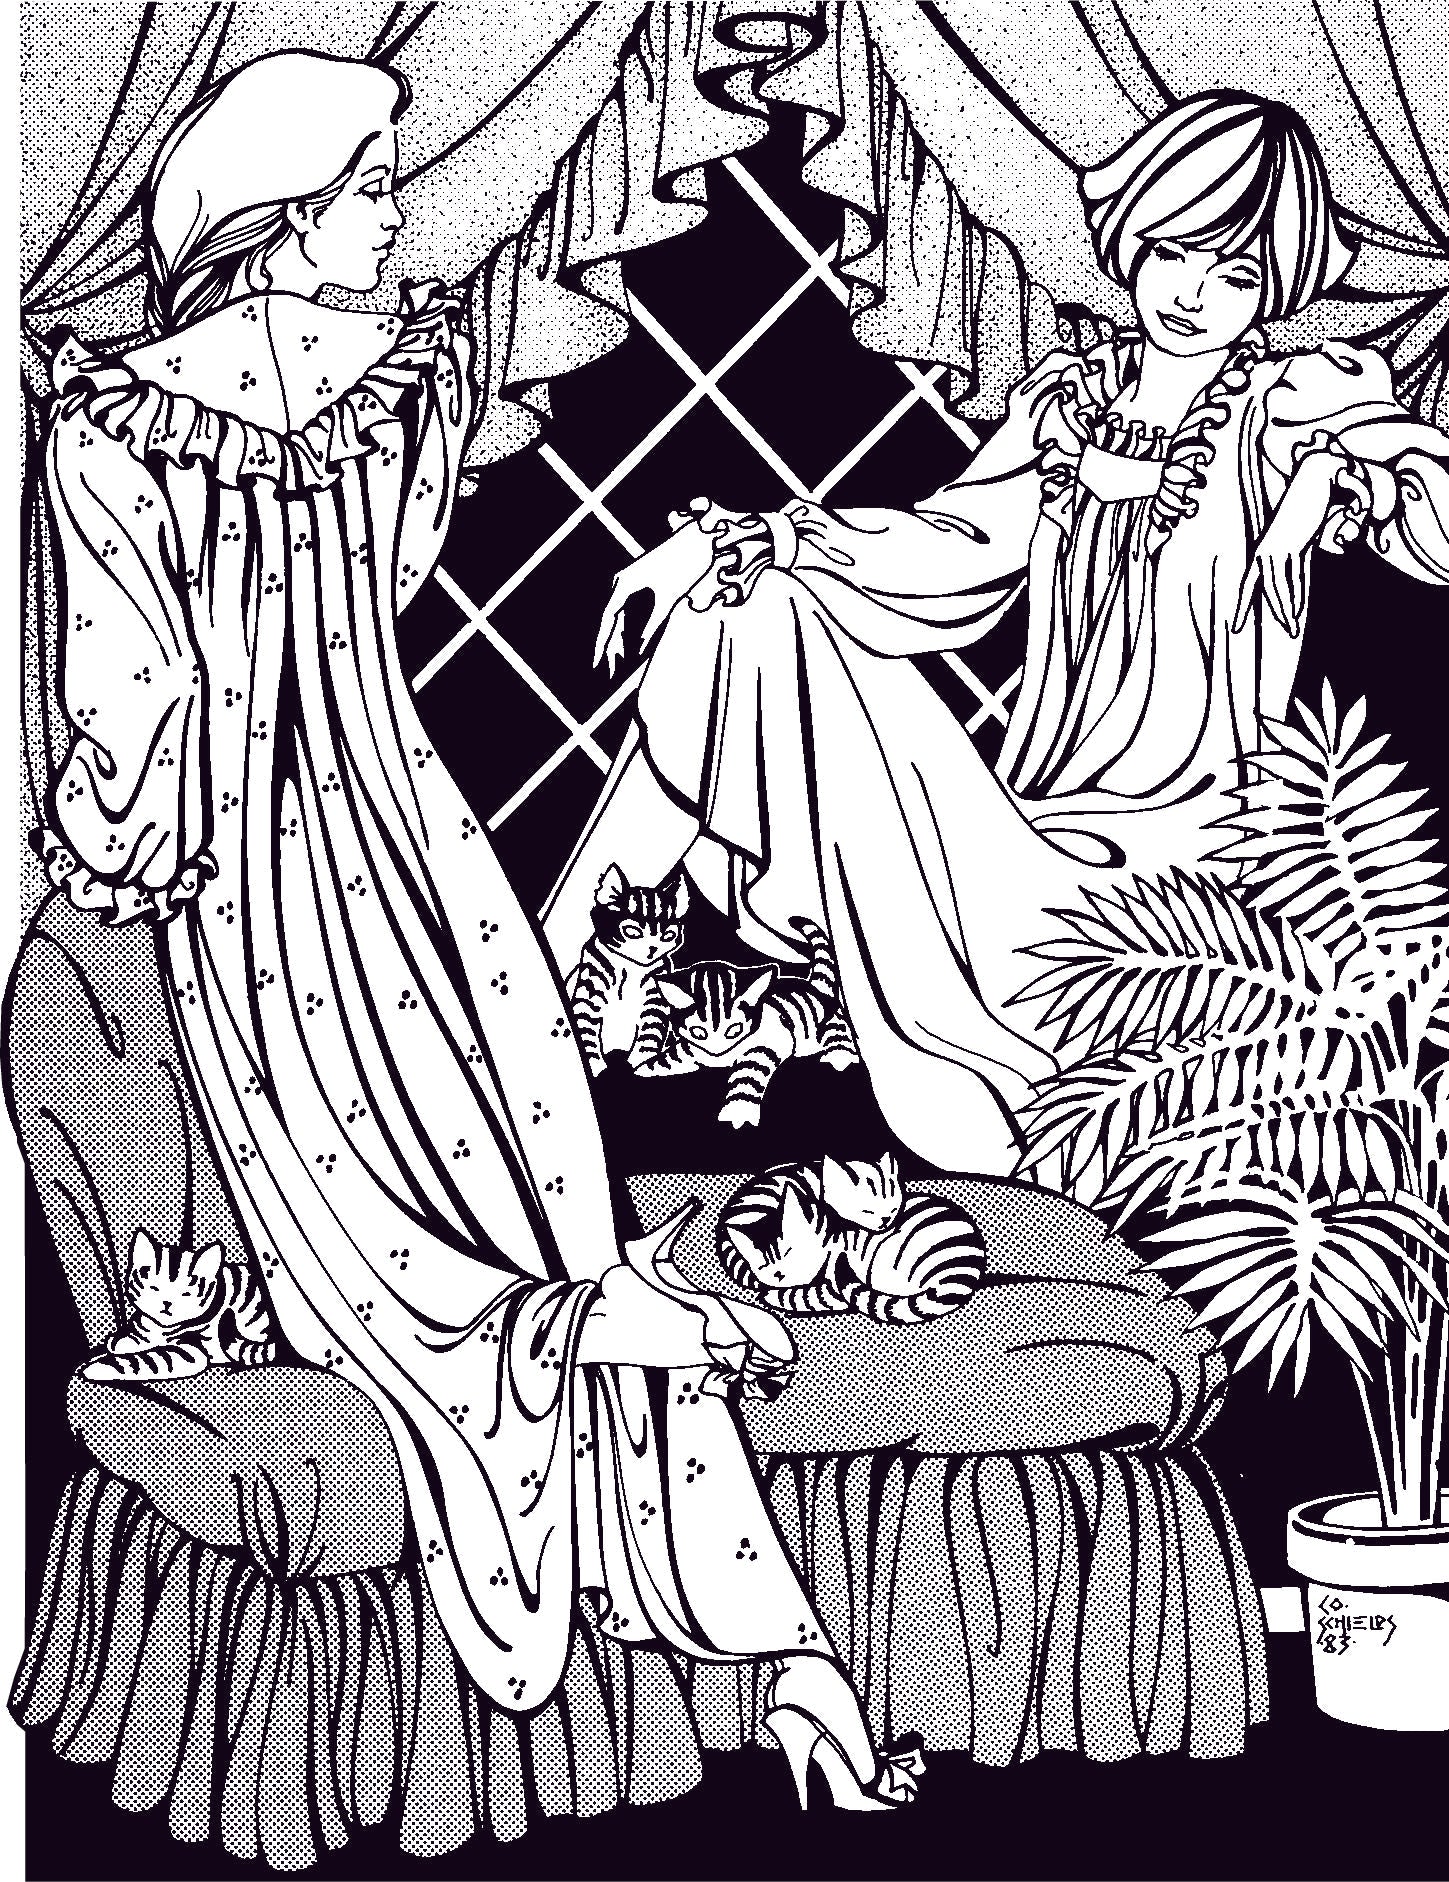 pen and ink drawing of two women wearing beautiful dreamer nightgowns sitting and kneeling on cushions with kittens.